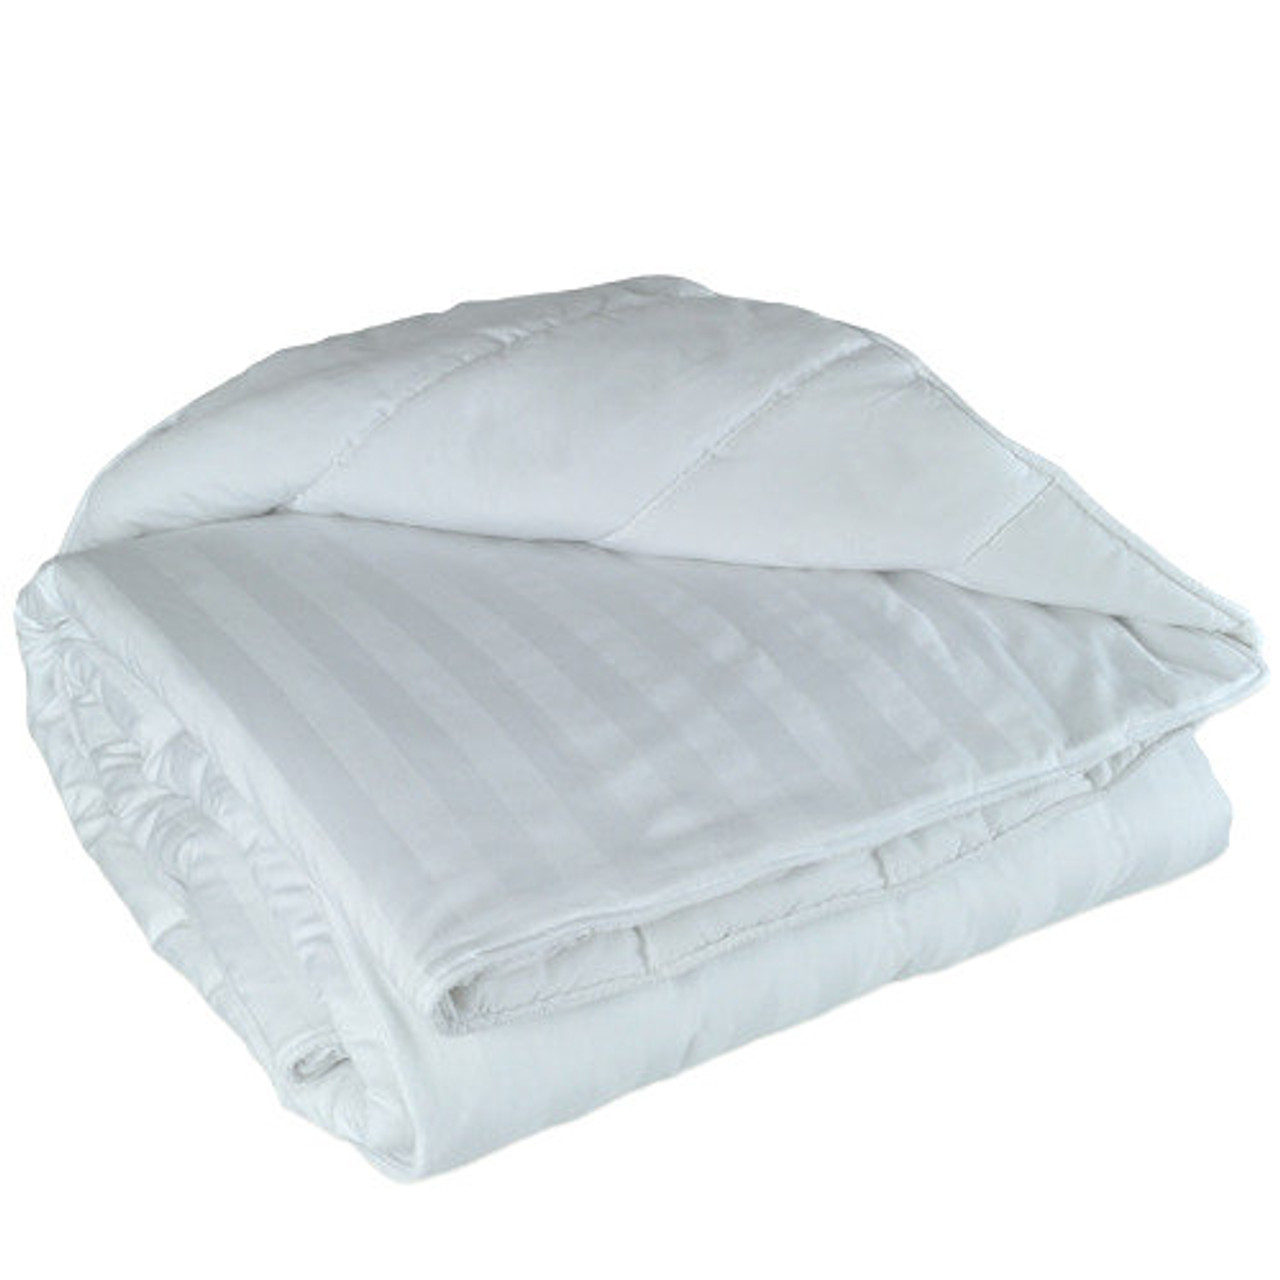 https://cdn11.bigcommerce.com/s-q0oajb576s/images/stencil/1280x1280/products/1341/3685/queen-t-250-low-wrinkle-eco-fill-covered-duvet-comforters-14__38308.1637184381.jpg?c=1